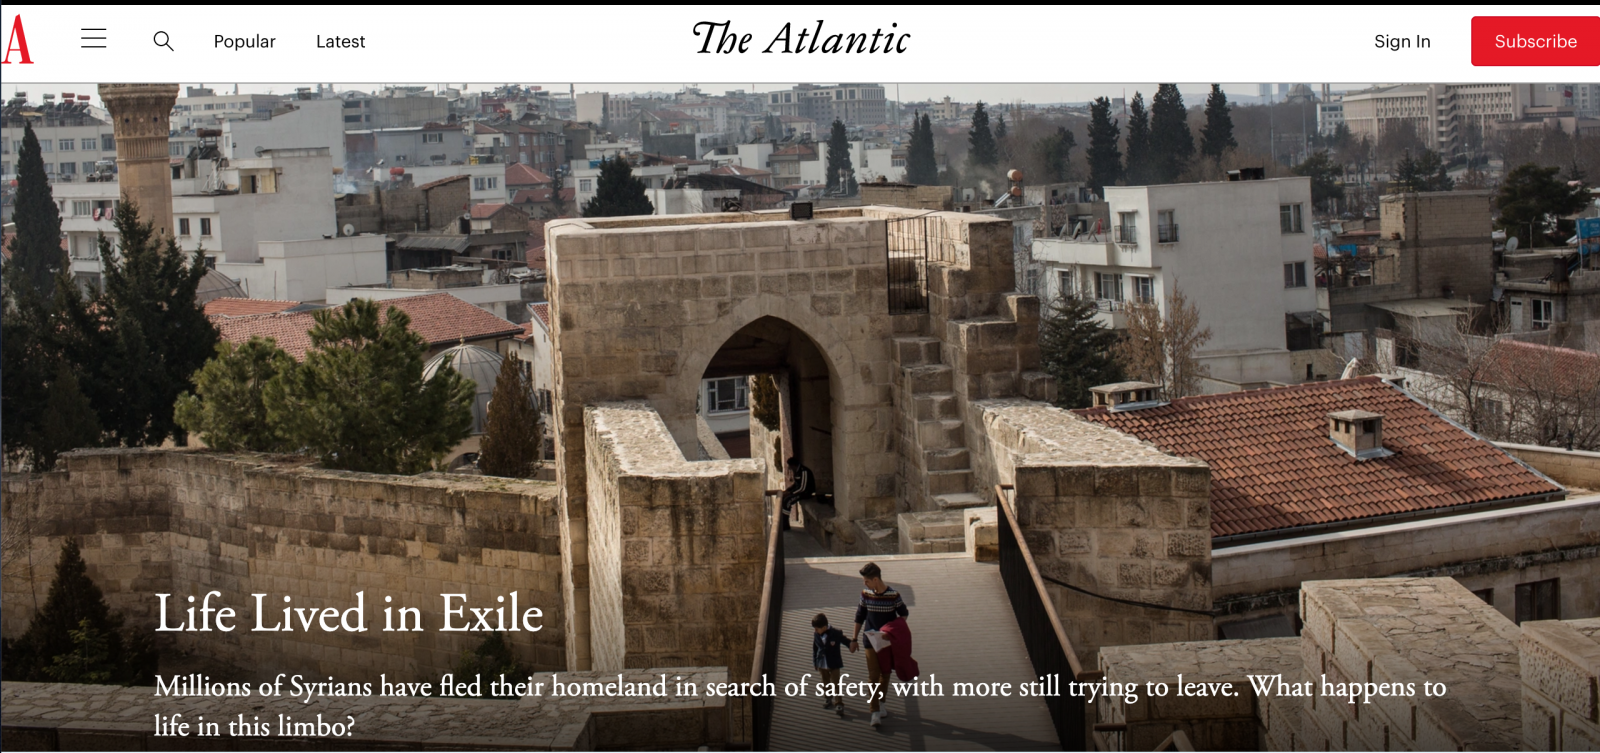 Thumbnail of The Atlantic - Life Lived in Exile